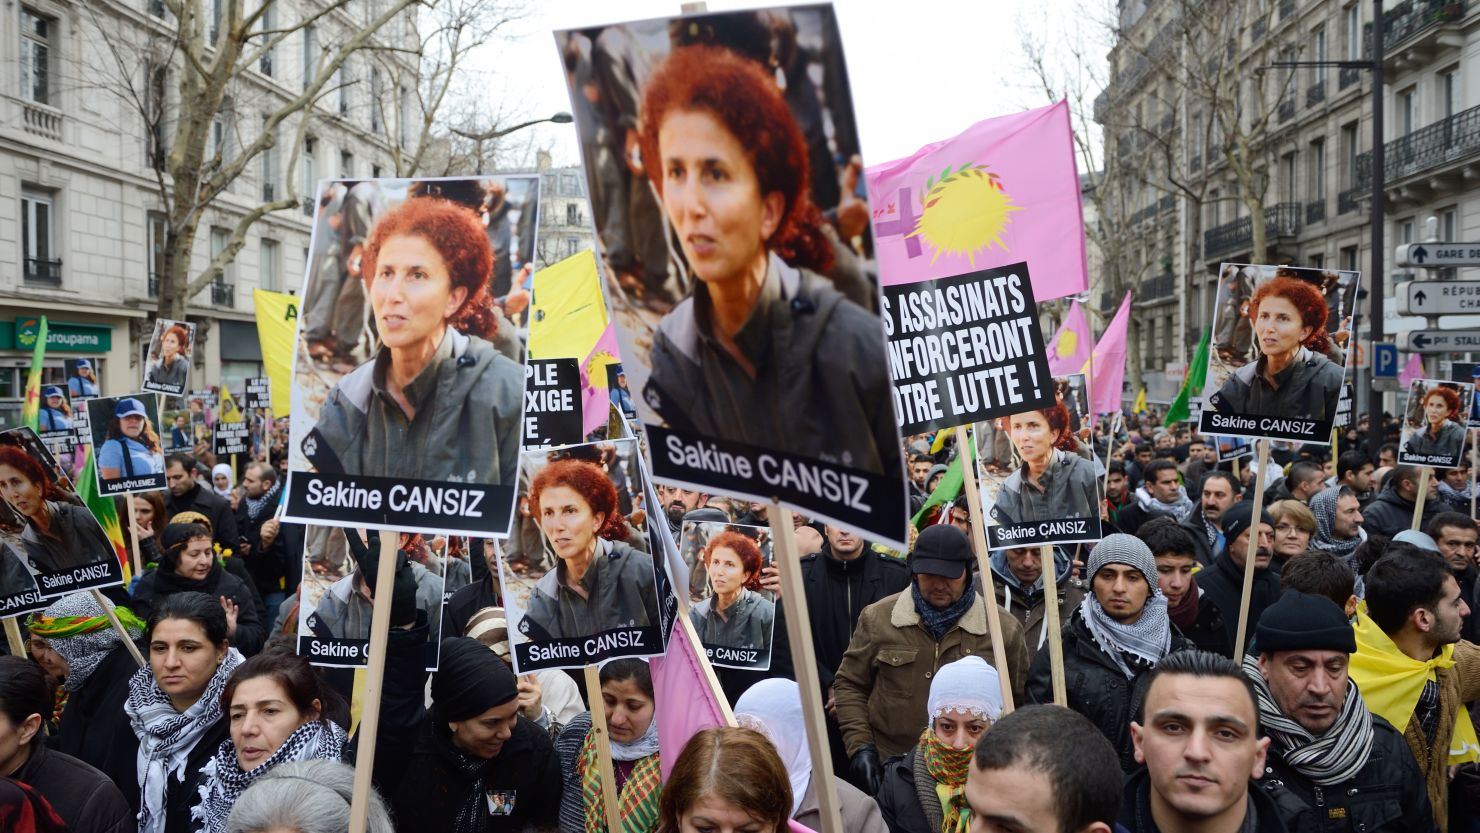 People hold posters of Sakine Cansiz, who was among three women found killed, during a demonstration Saturday in Paris.